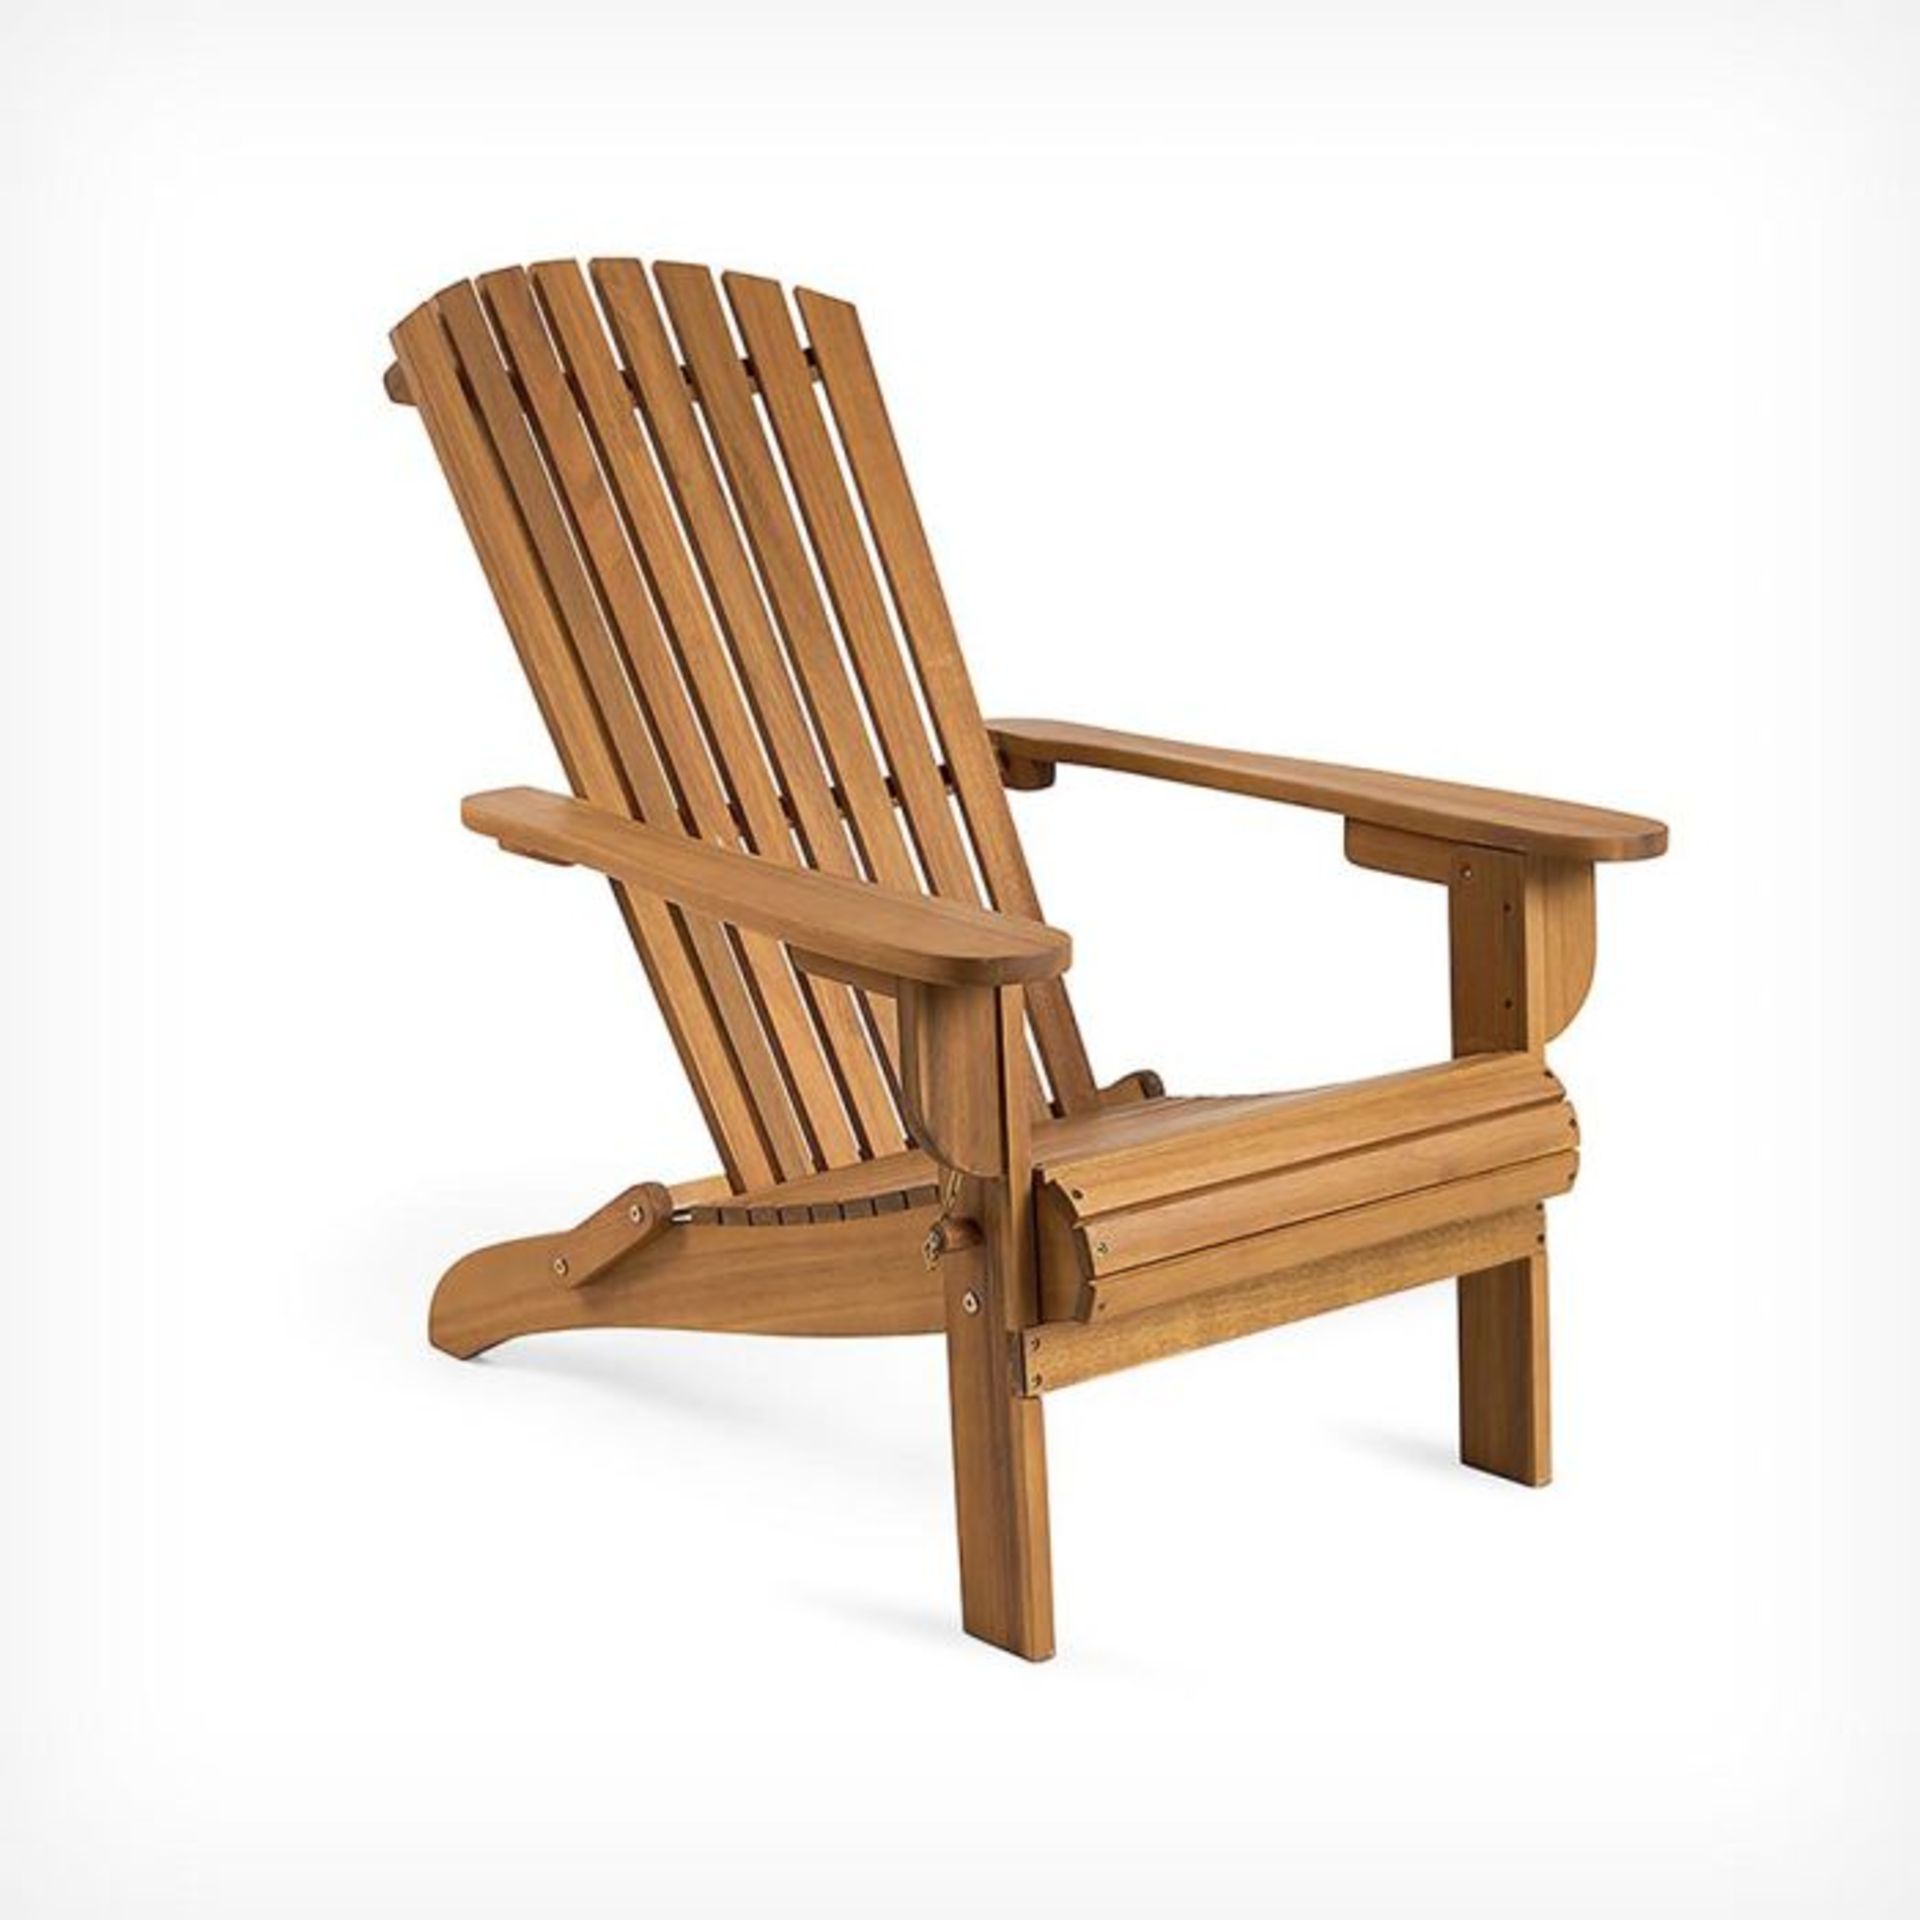 Folding Adirondack Chair. - ER37. Escape the hustle and bustle of everyday life and say hello to